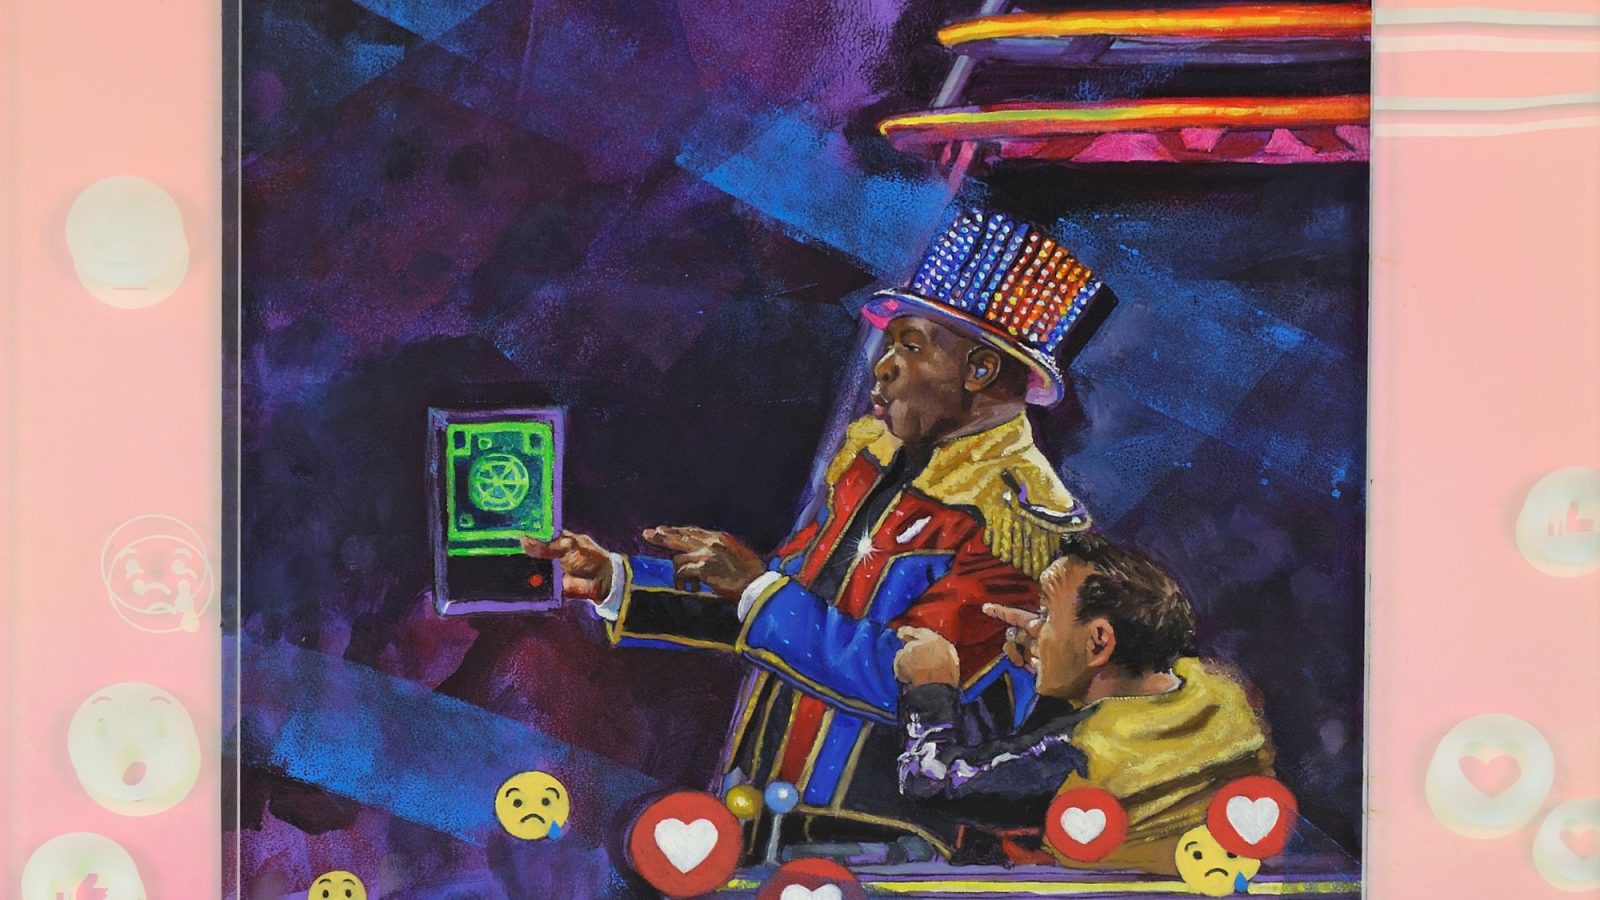 Painting by Toni-Lee Sangastiano featuring Ringmaster Johnathan Lee Iverson while performing.